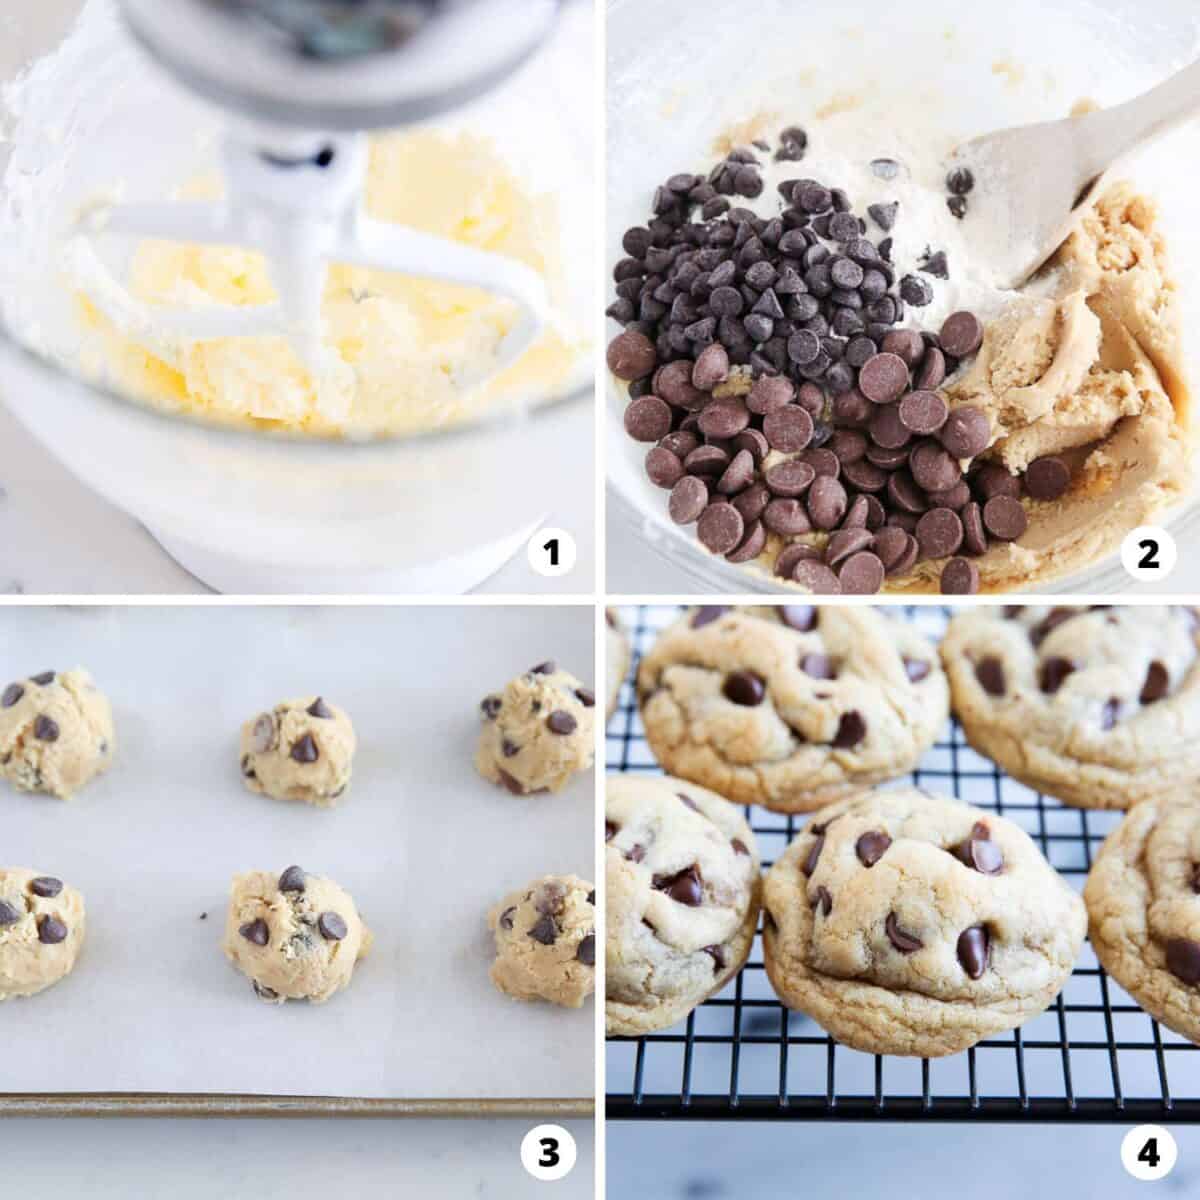 Showing how to make chocolate chip cookies in a 4 step collage.